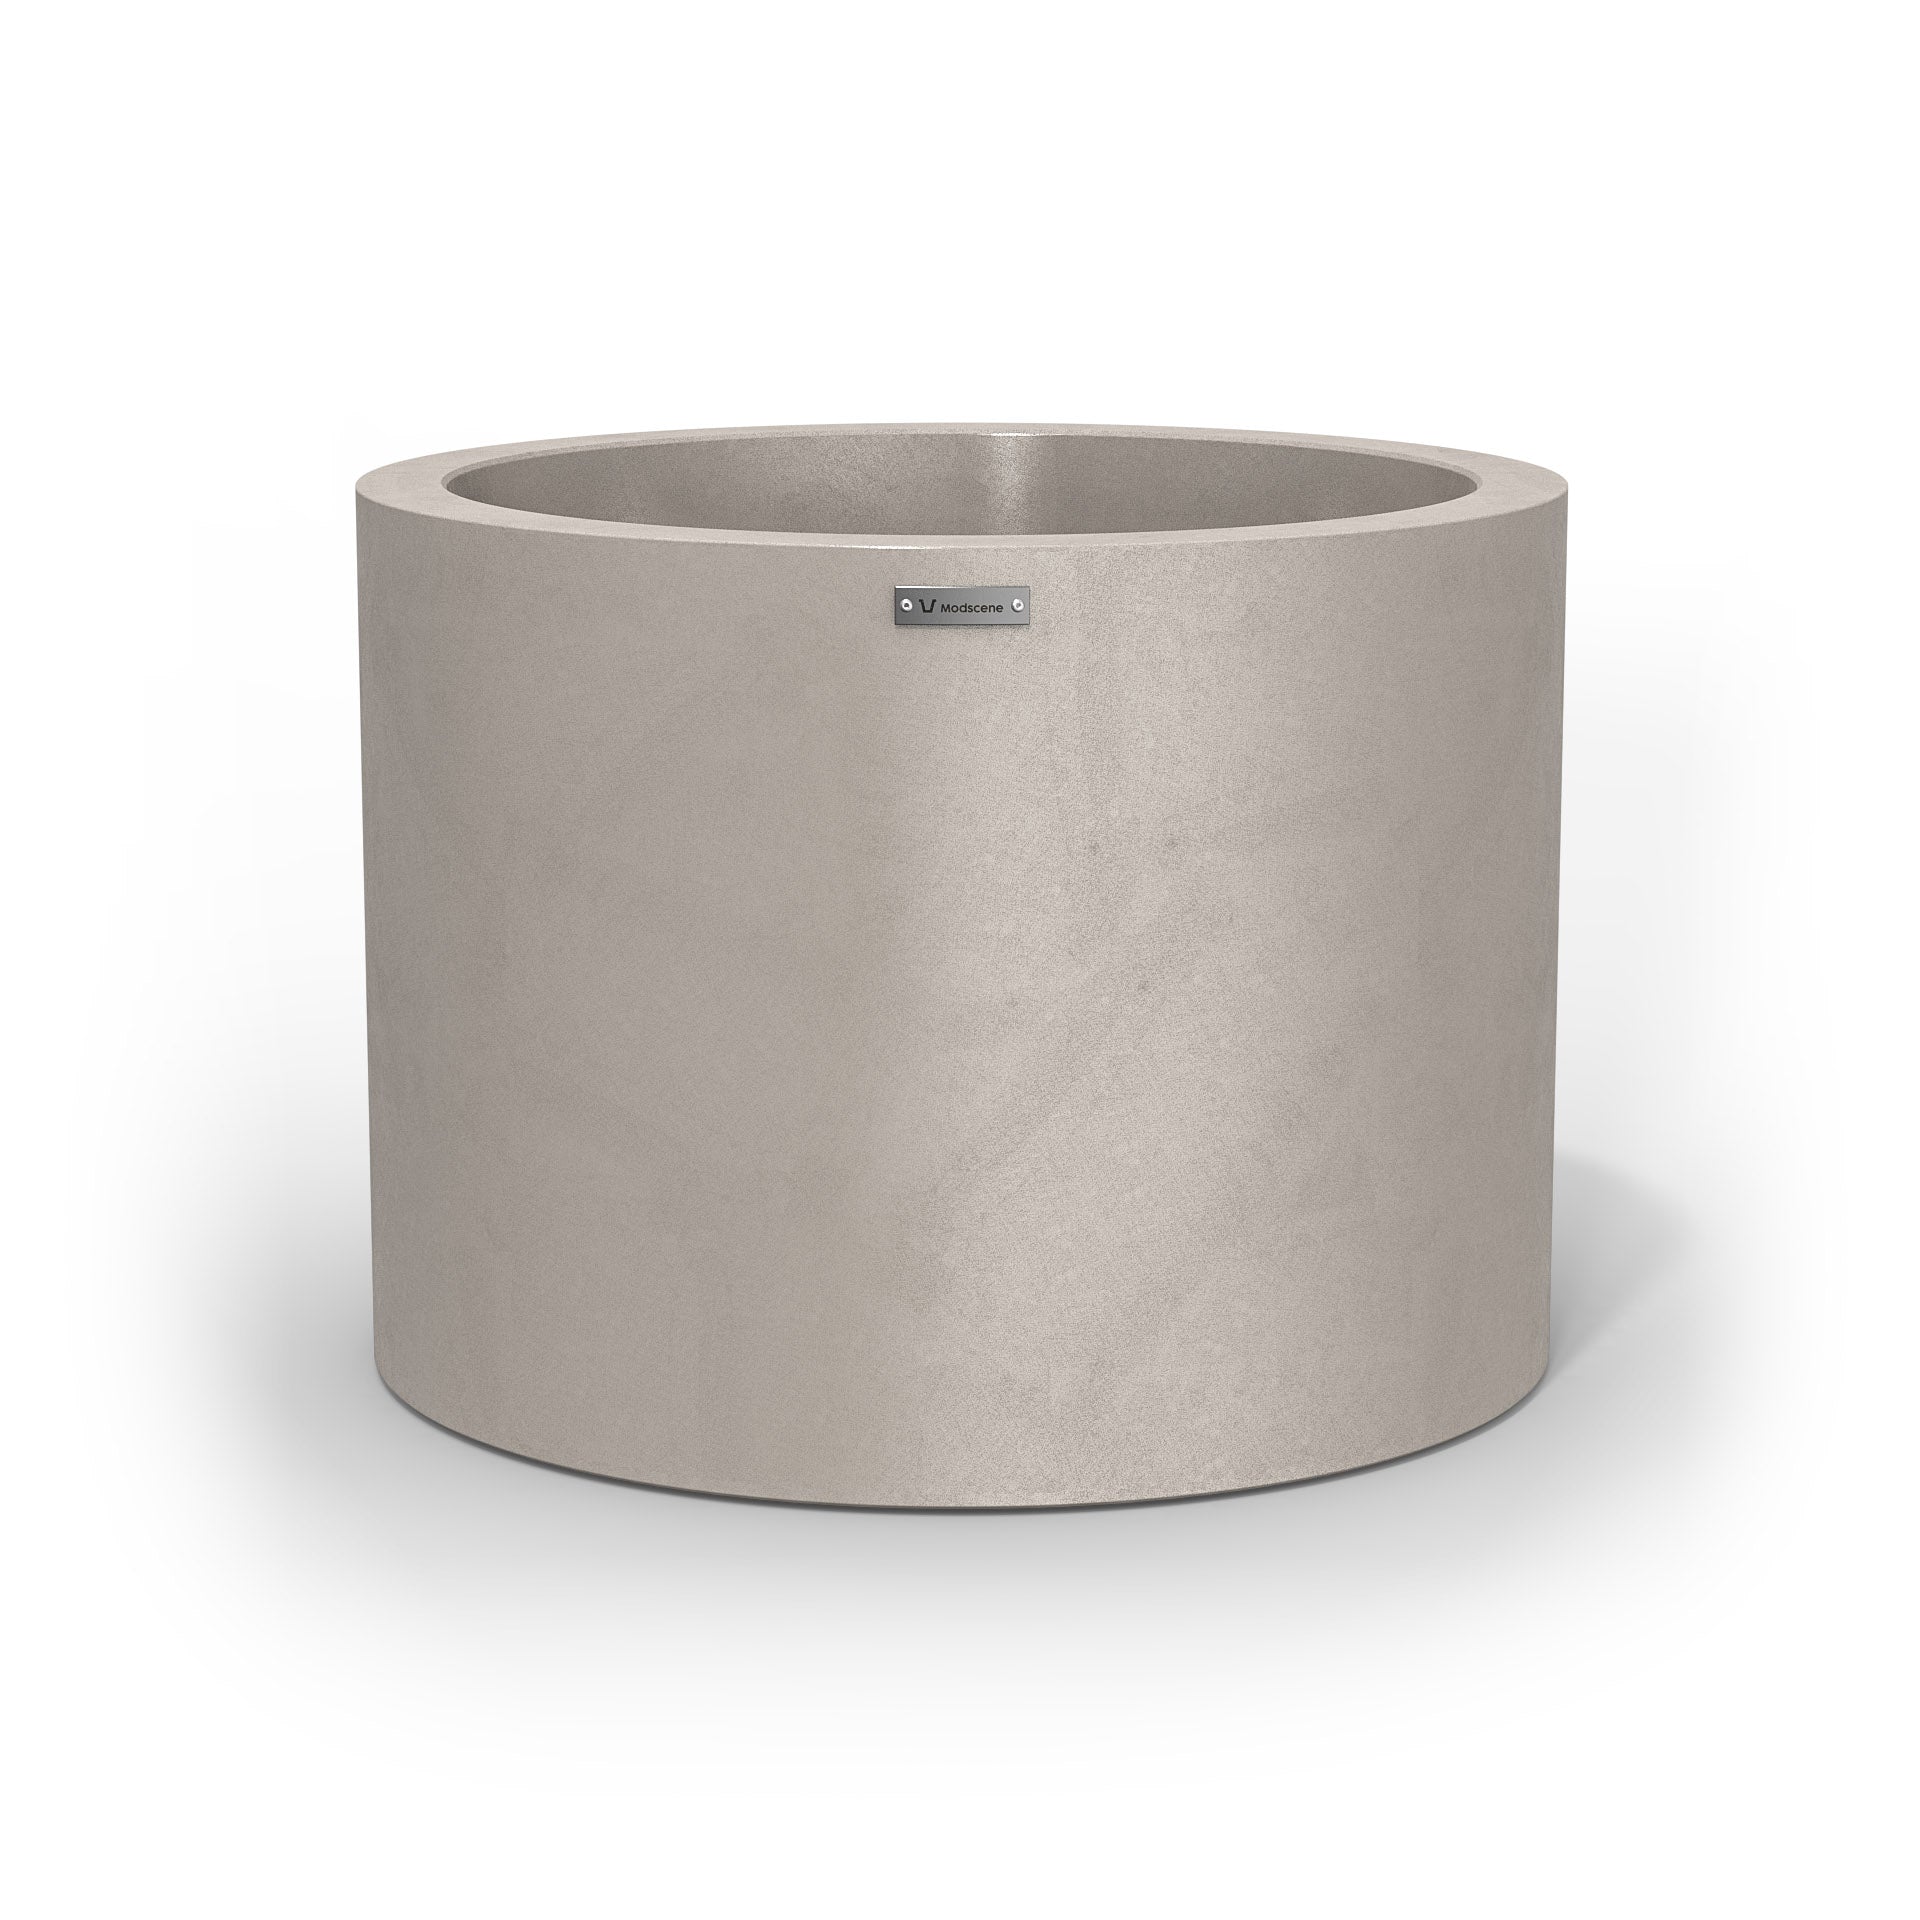 A cylinder shaped pot planter with a concrete look finish.